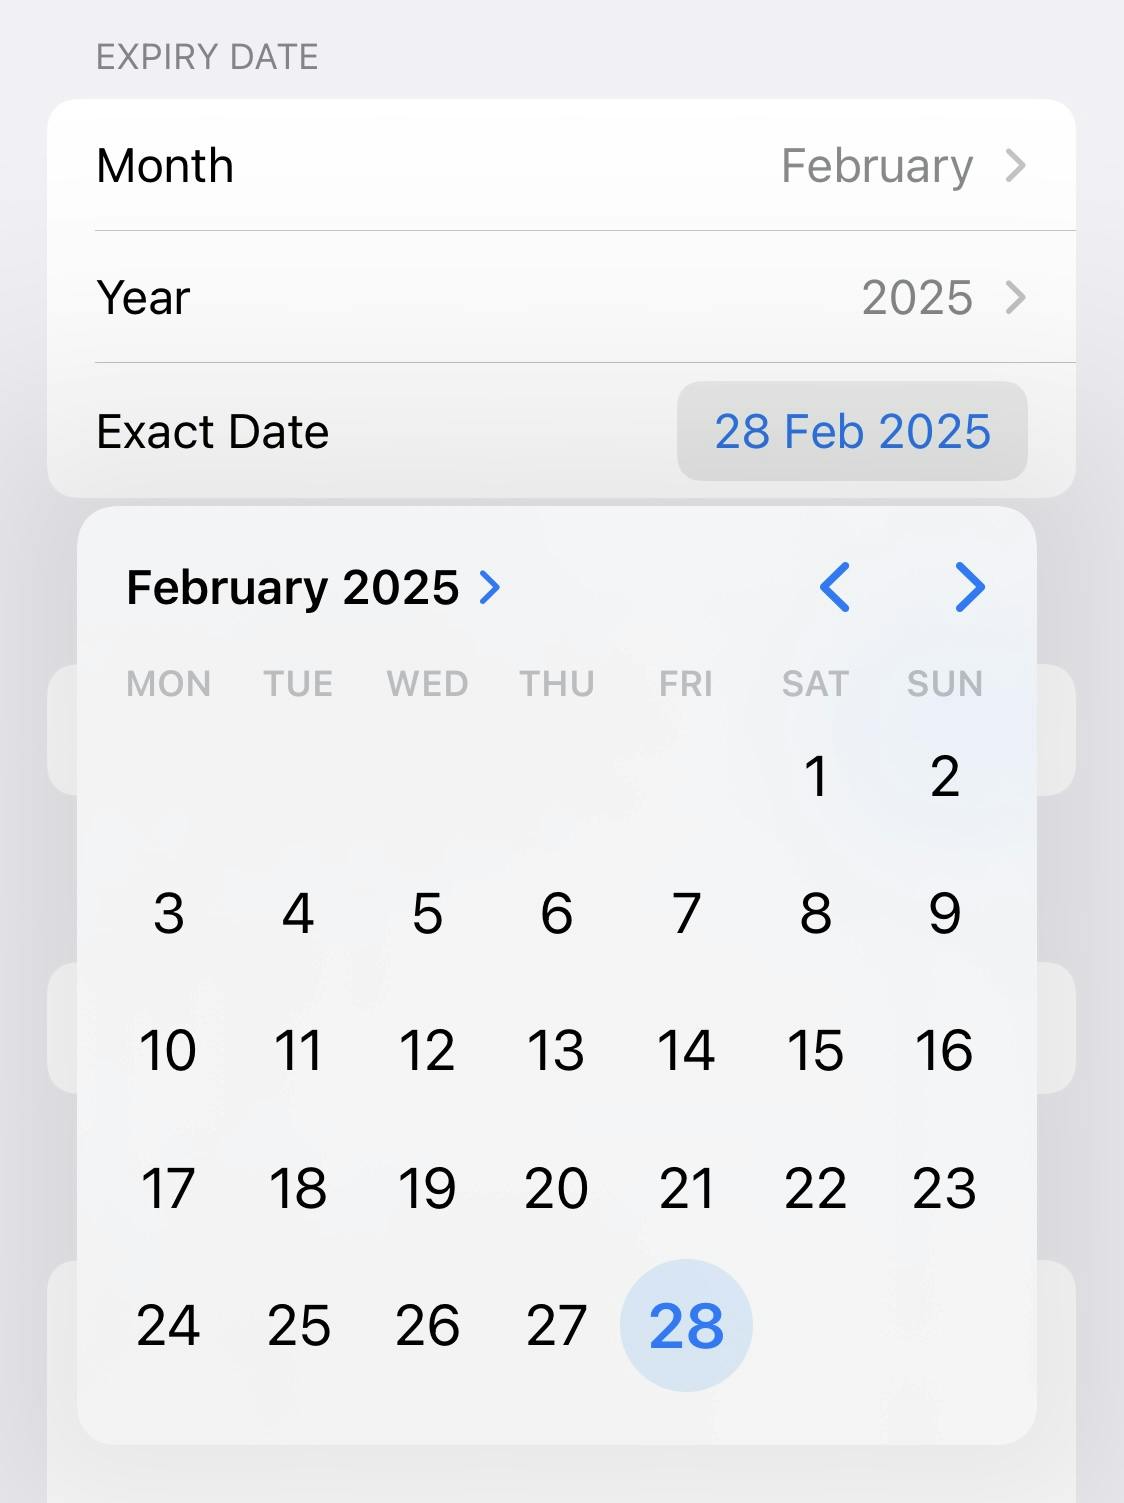 A date picker to select an exact expiry date.